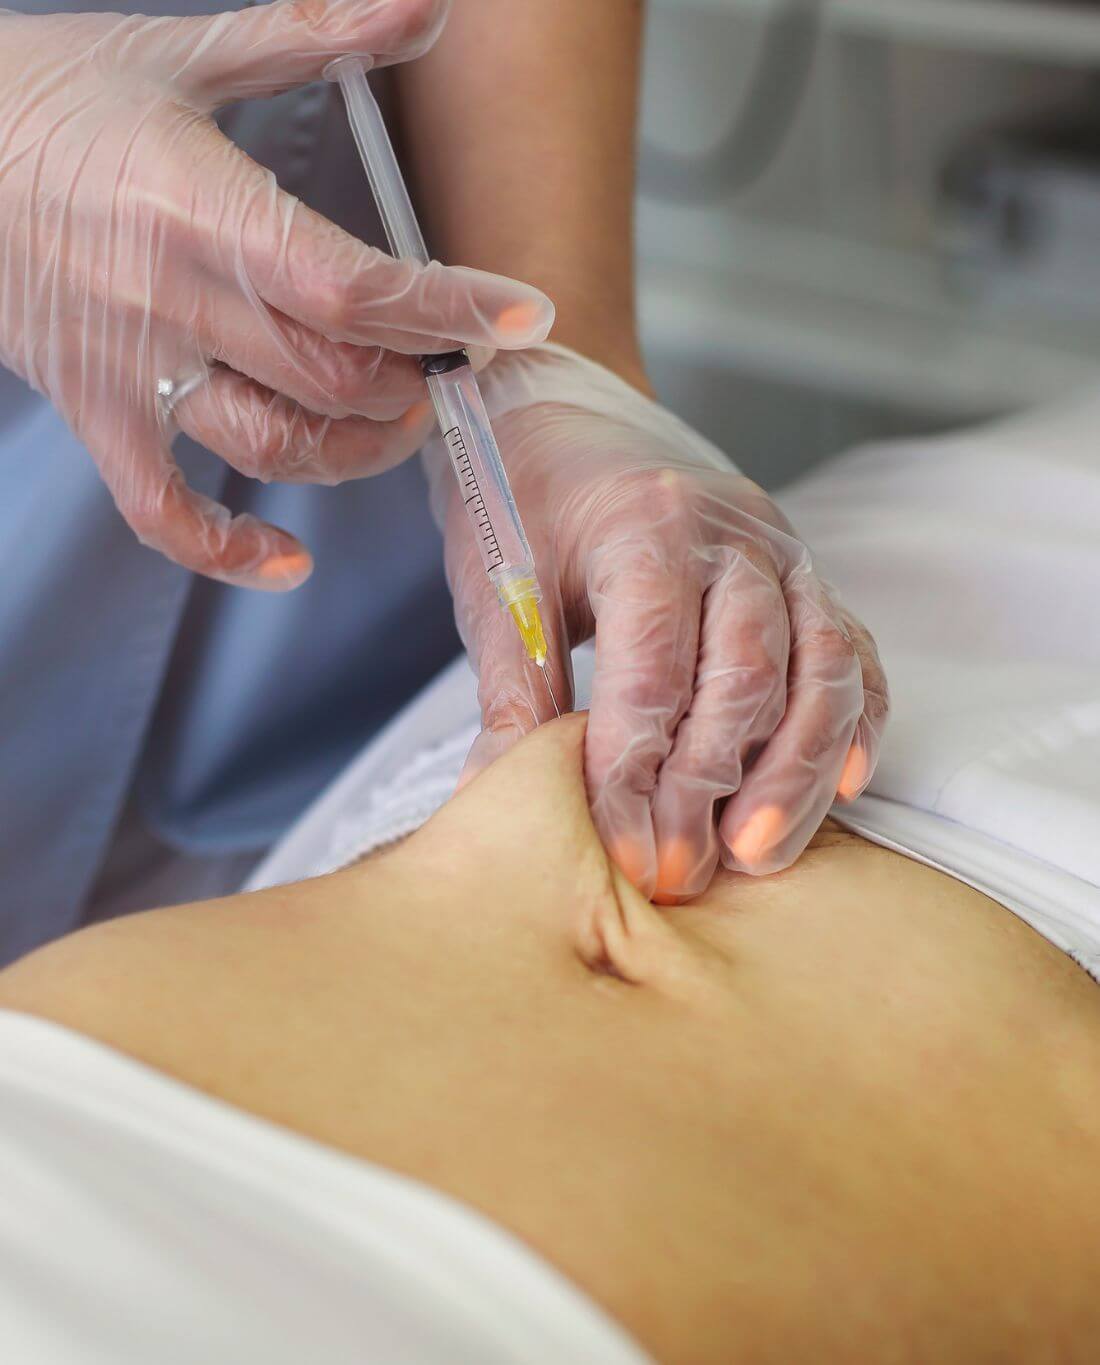 An image of a woman's abdomen having a Semaglutide treatment injected into it. 